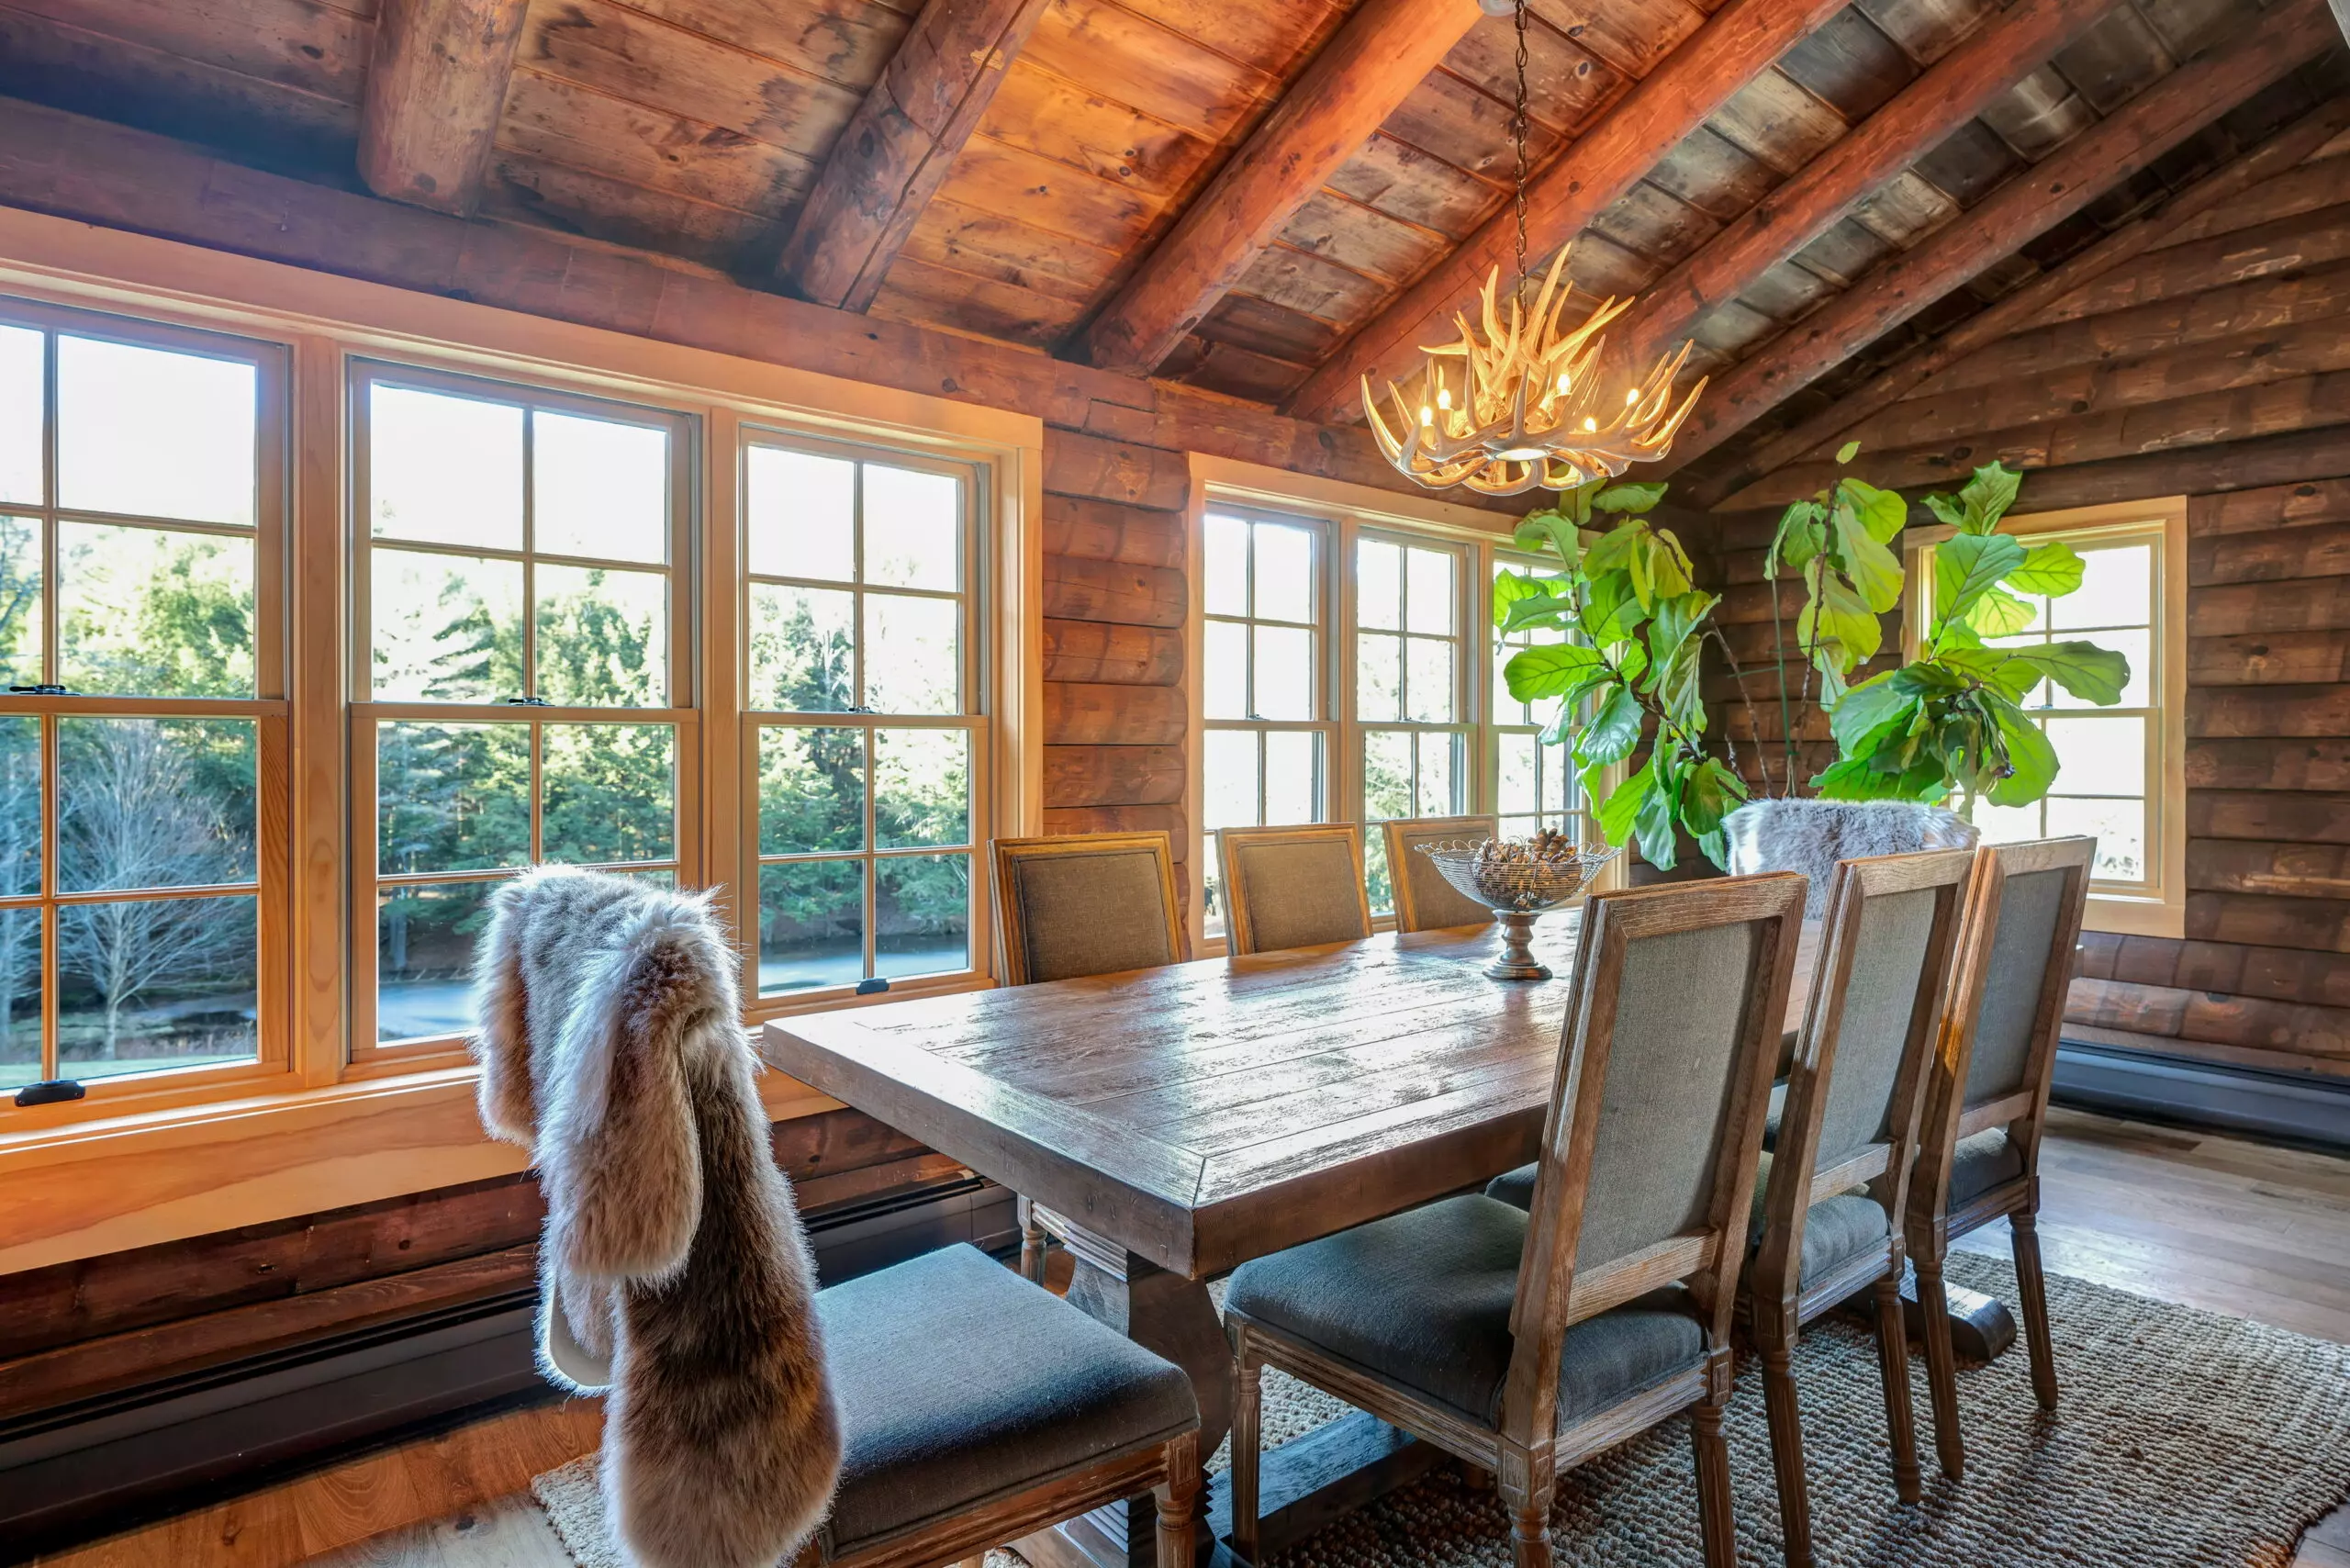 Refined Rustic Dining